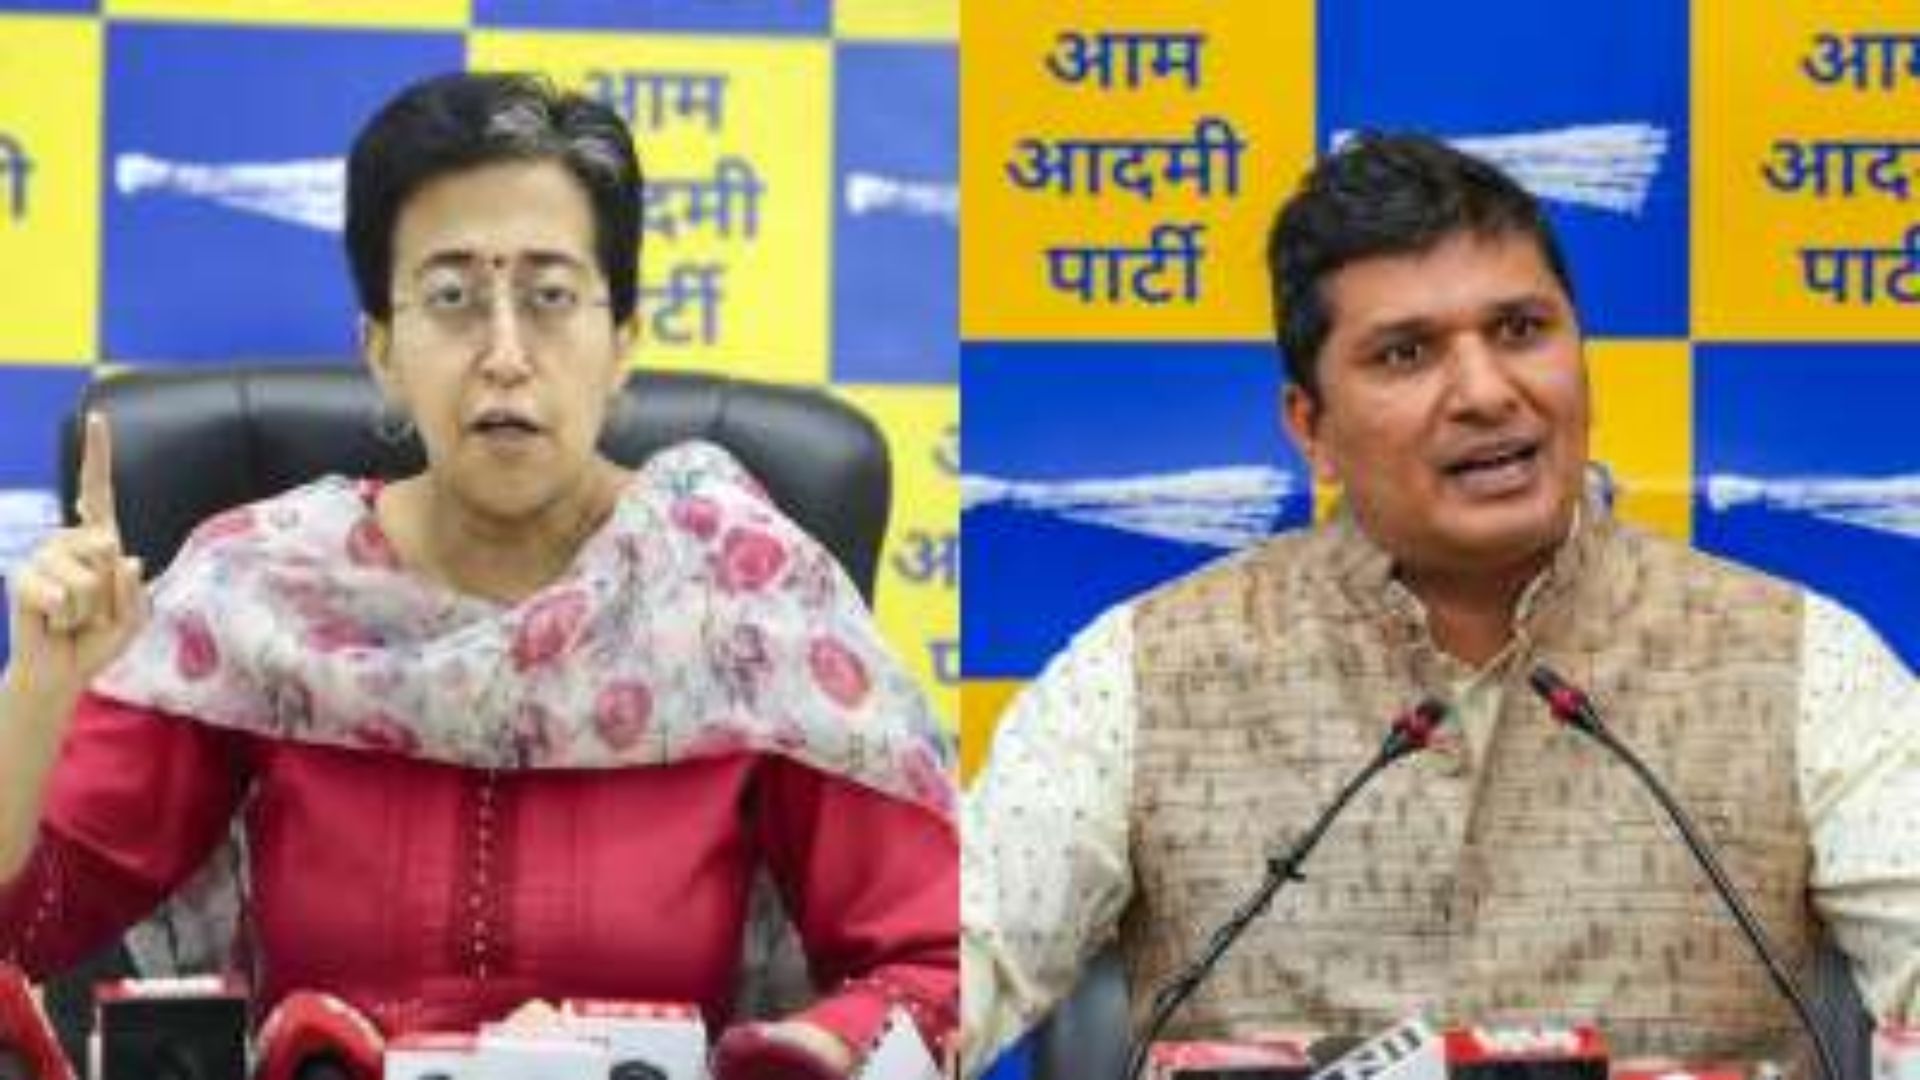 AAP Ministers Atishi, Saurabh Bharadwaj detained as party protests arrest of Kejriwal